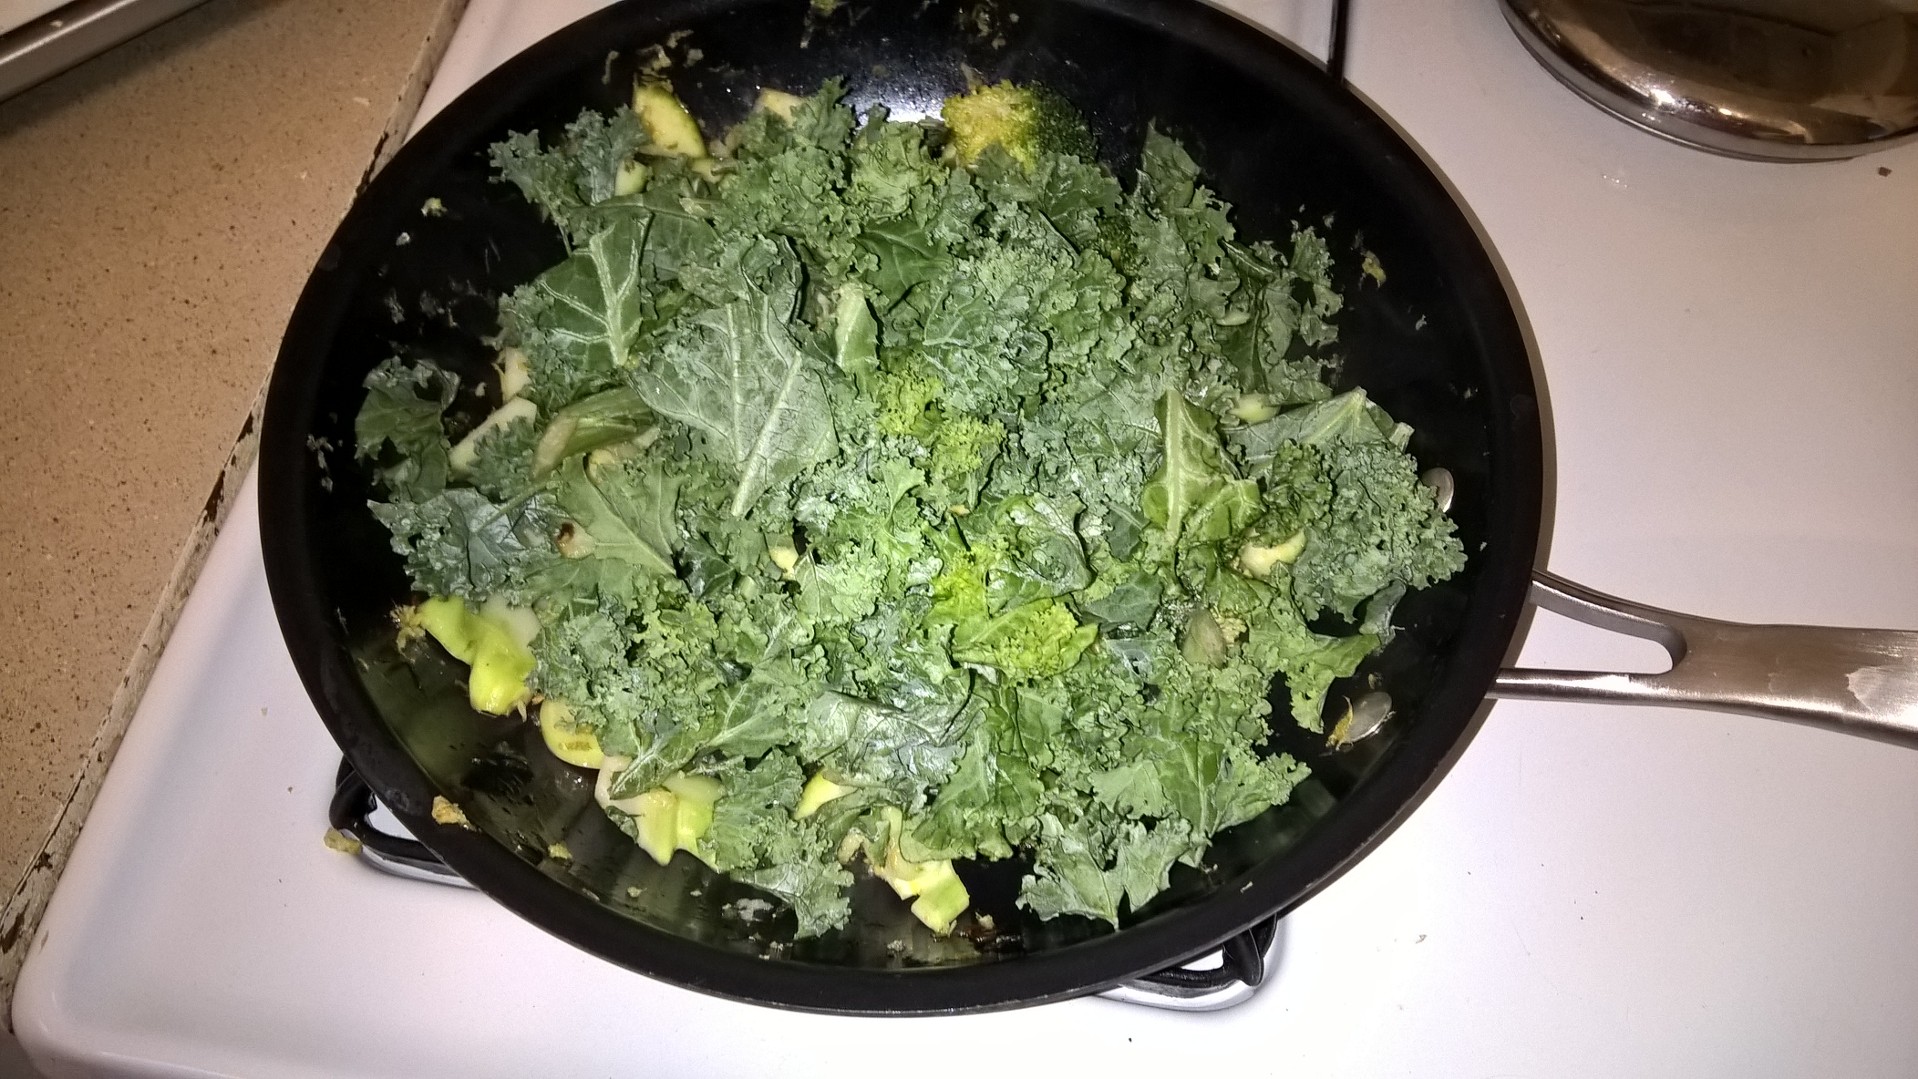 Veggies with kale on top